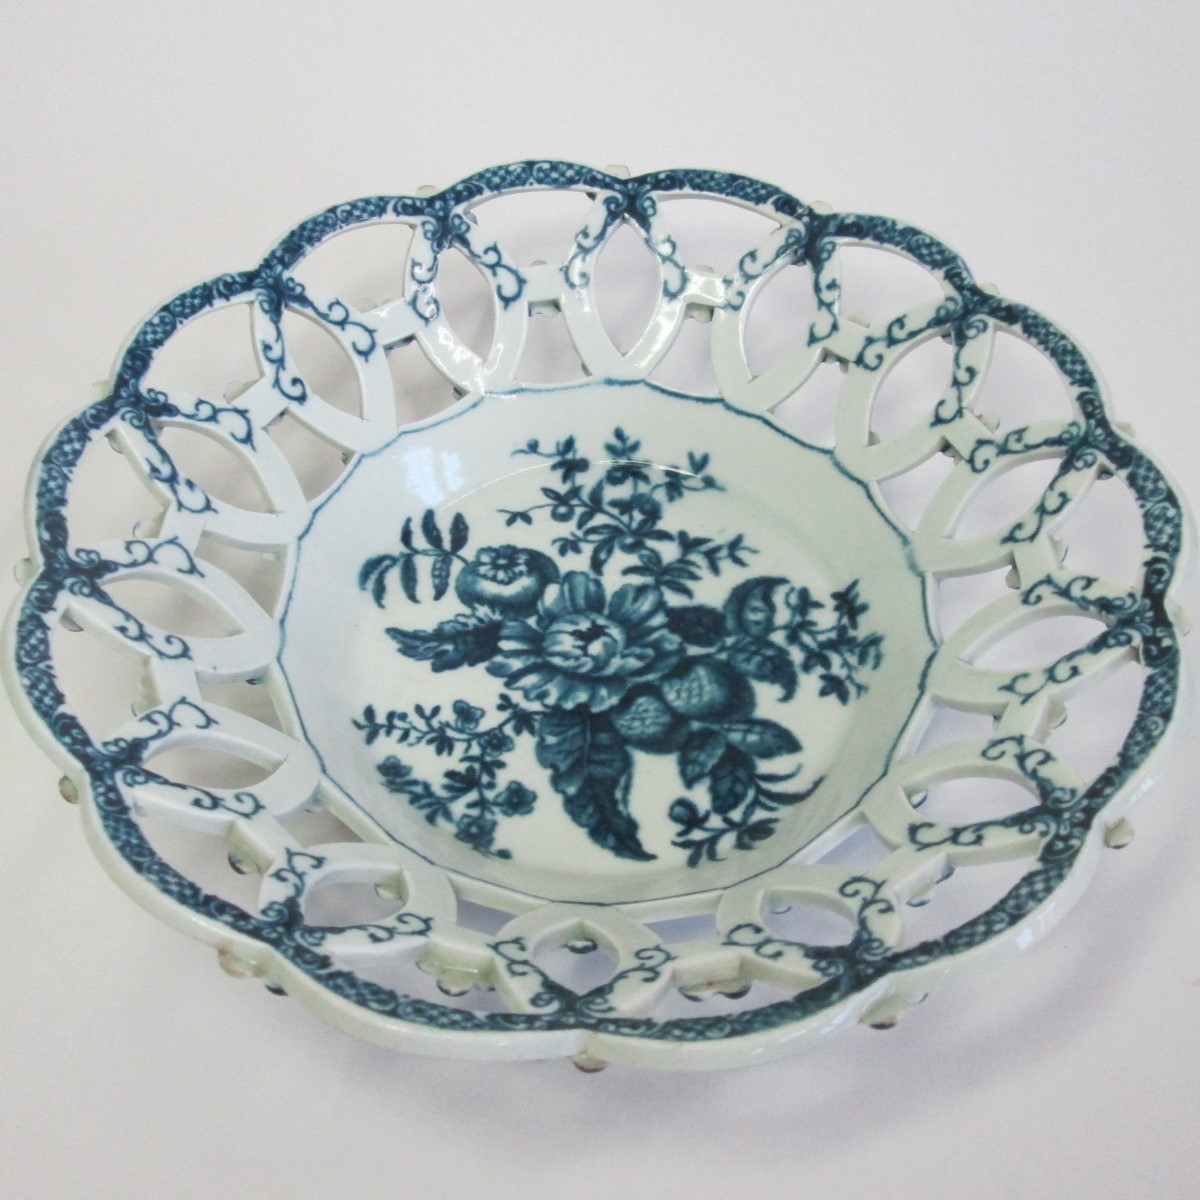 A large Worcester  blue and white round basket printed with the pinecone pattern. Circa 1770